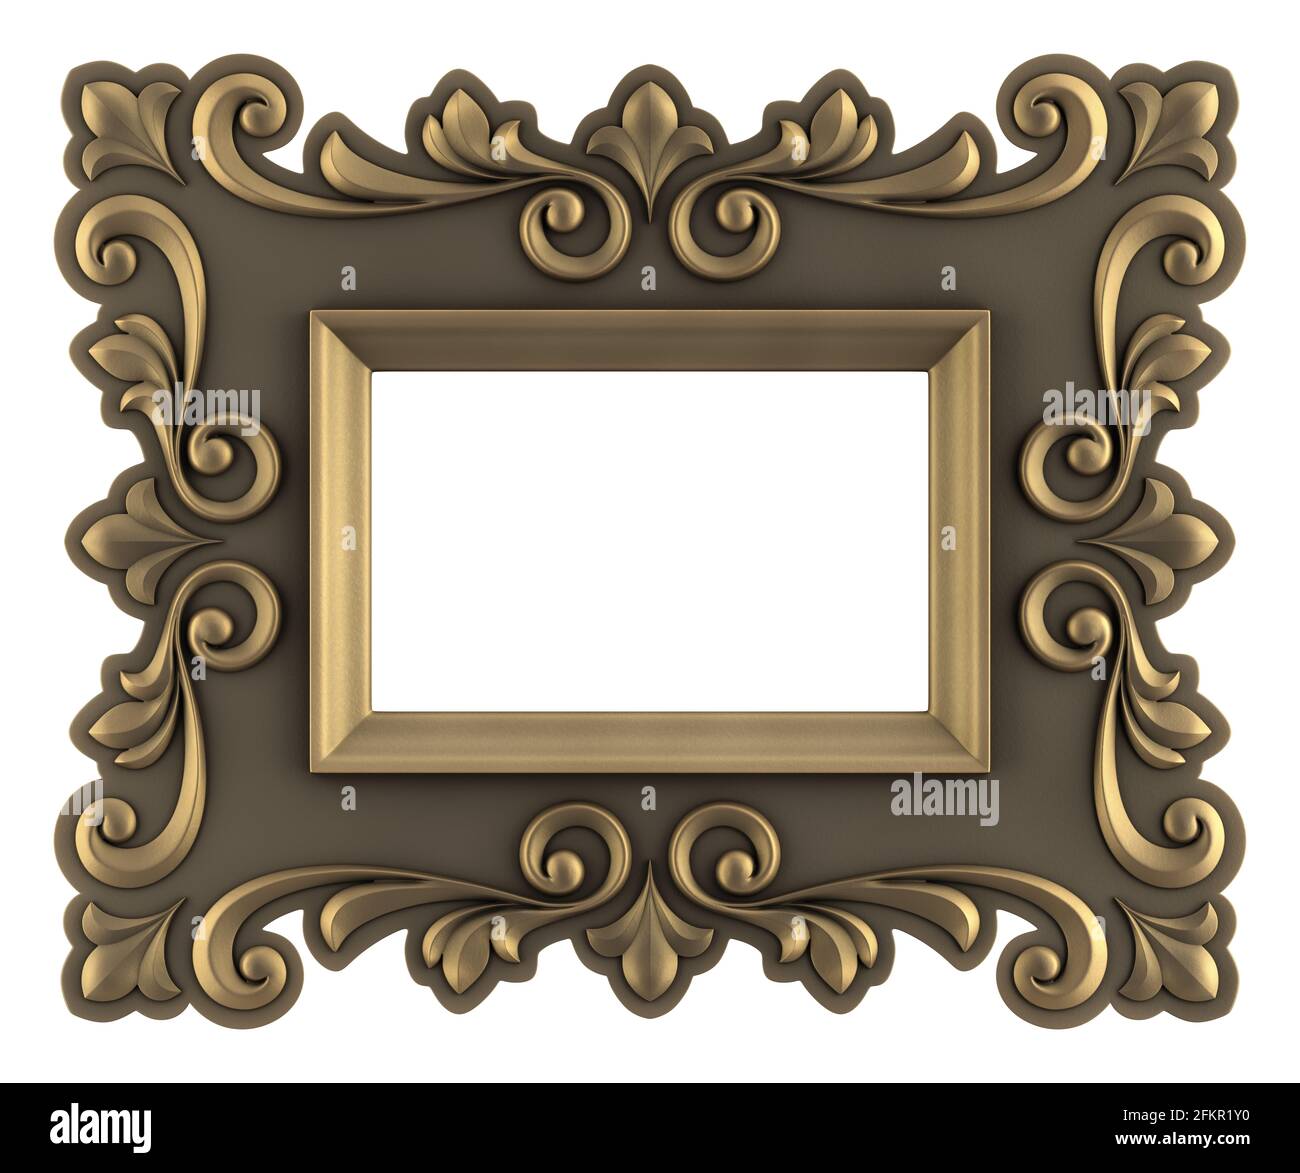 Vintage Artistic Picture Frame Stock Photo